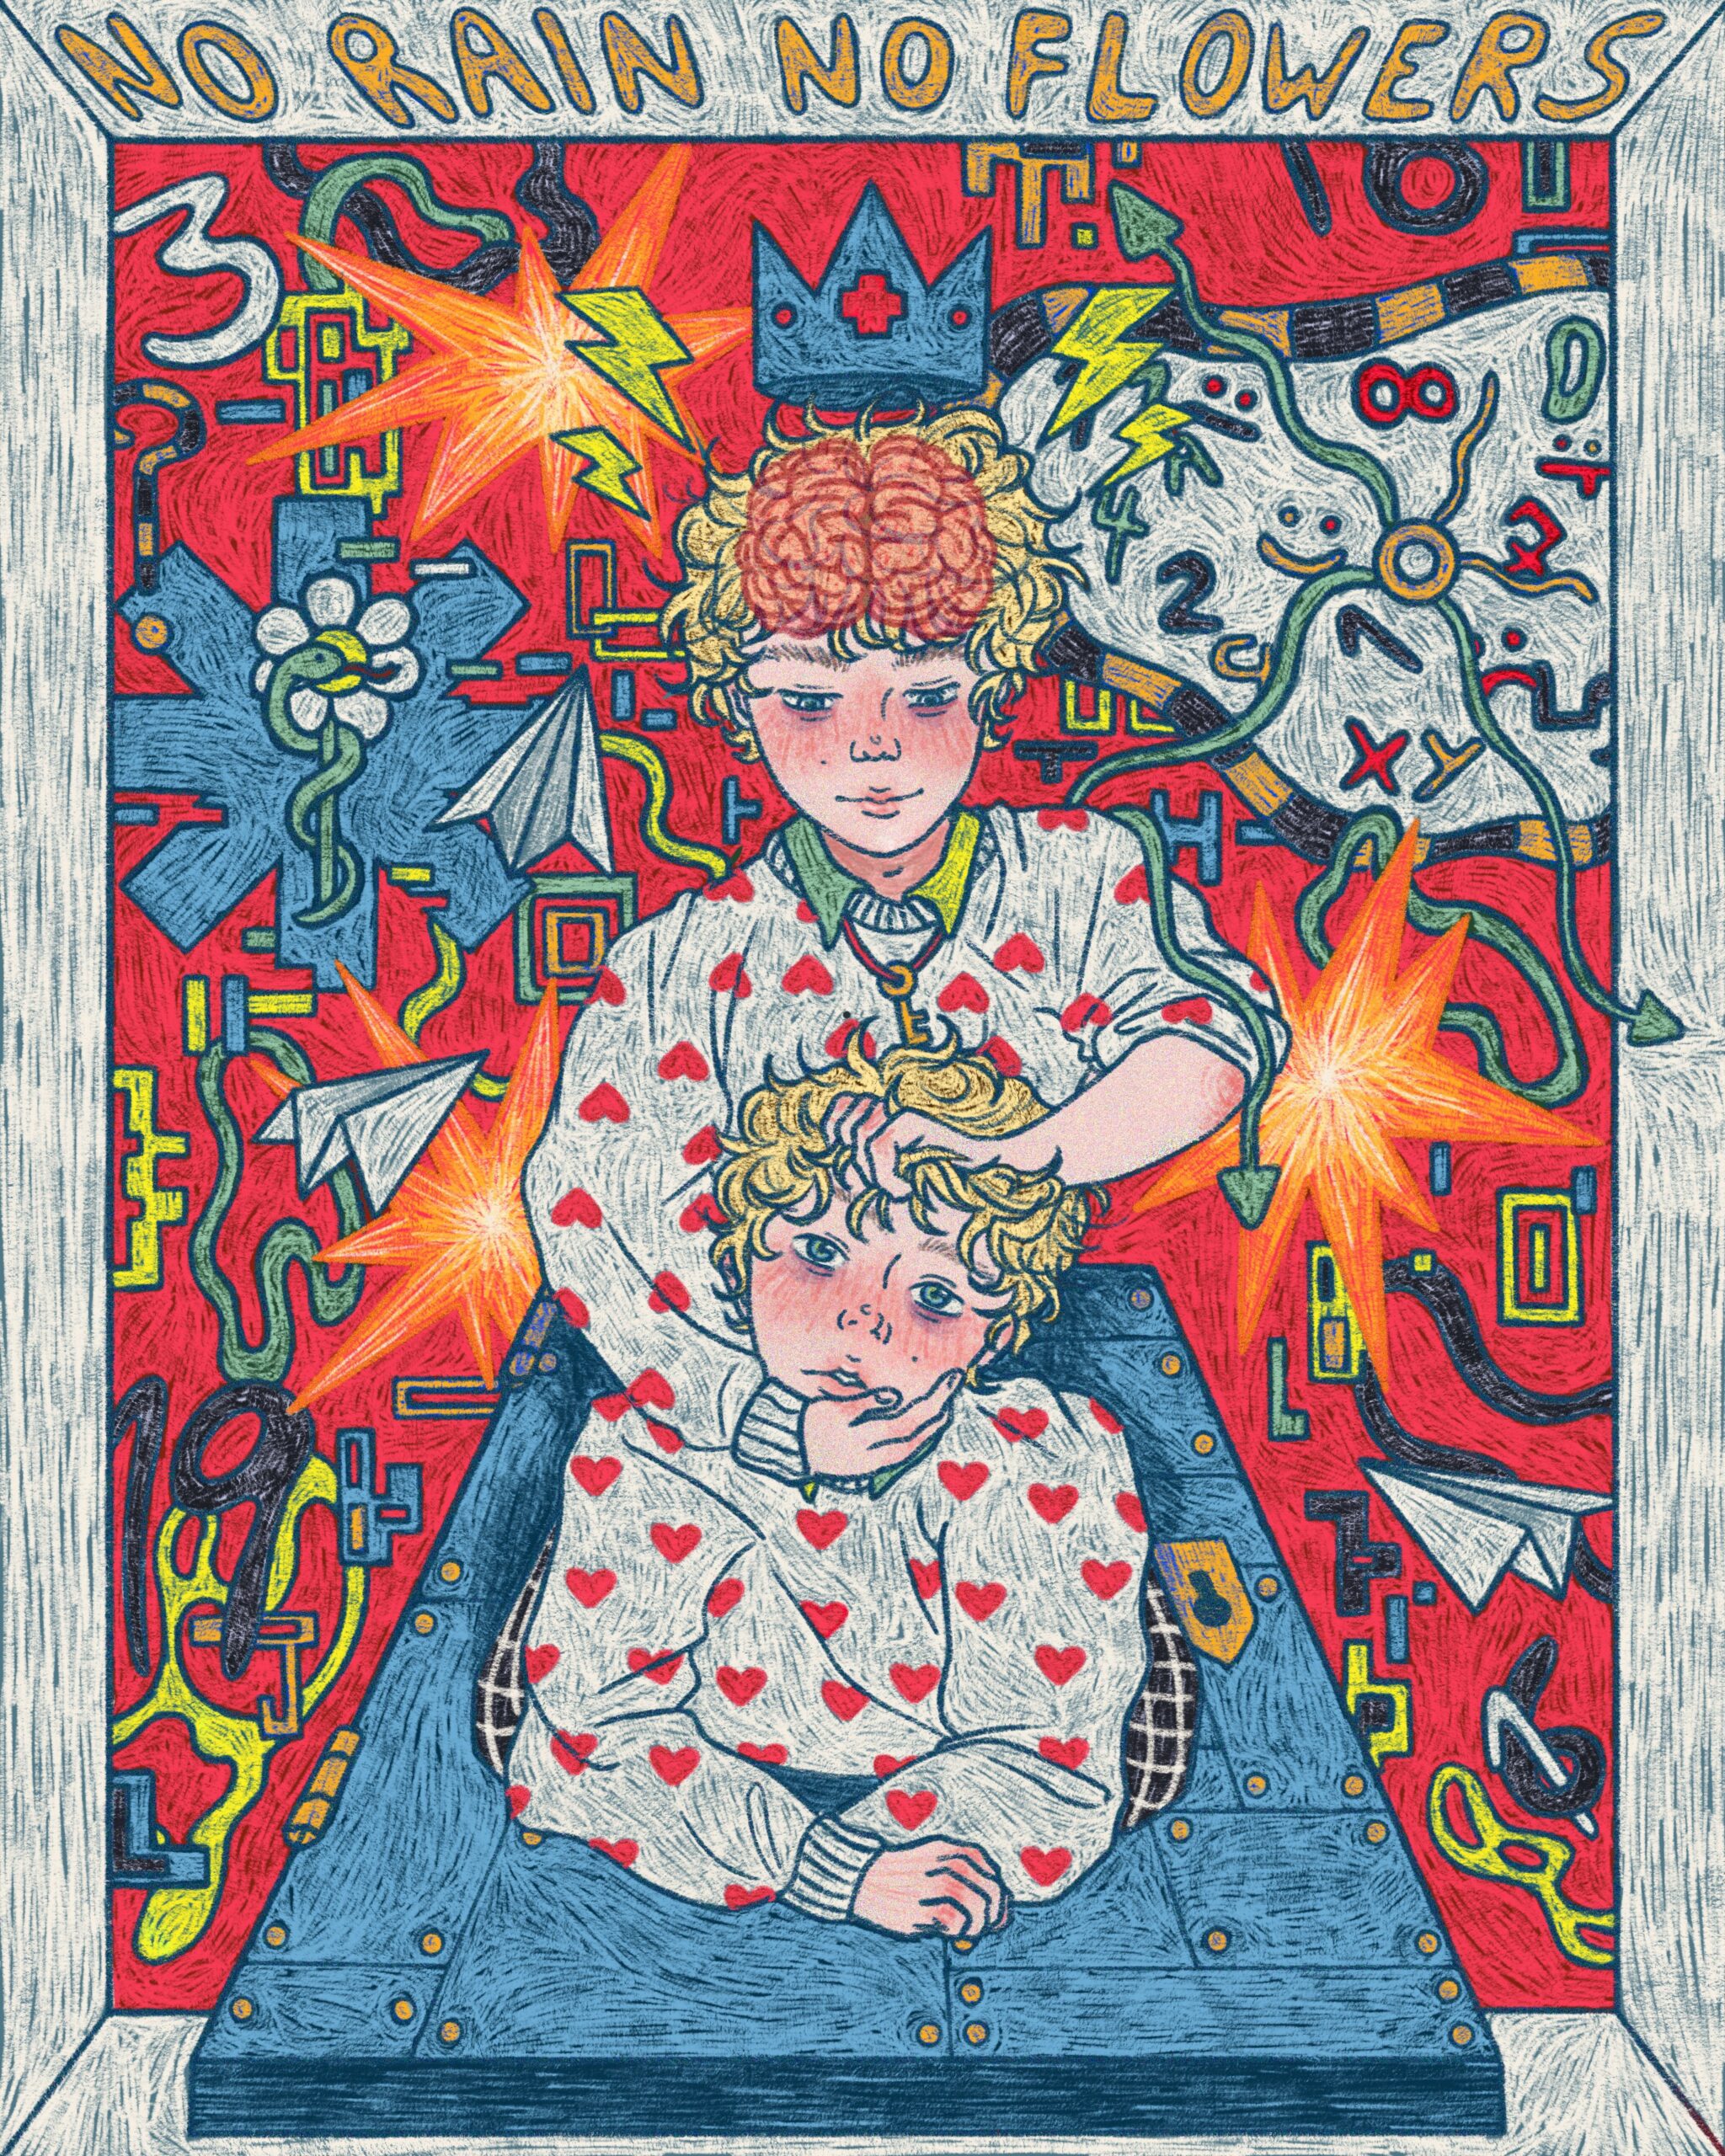 This digital drawing includes a grey frame, titled in orange bubble letters “NO RAIN, NO FLOWERS.” The background is bright red punctuated by yellow/orange starbursts and brightly coloured shapes, some snake-like and organic, others angular. Two twin-like figures are front and centre, wearing white sweaters patterned with red hearts. One, sporting an exposed brain, grasps the other’s head by hair and chin as if to violently wrench it off. The victim wears the sad, bored expression of defeat. Medical insignia, paper airplanes, and a melty clock hover around the scene.